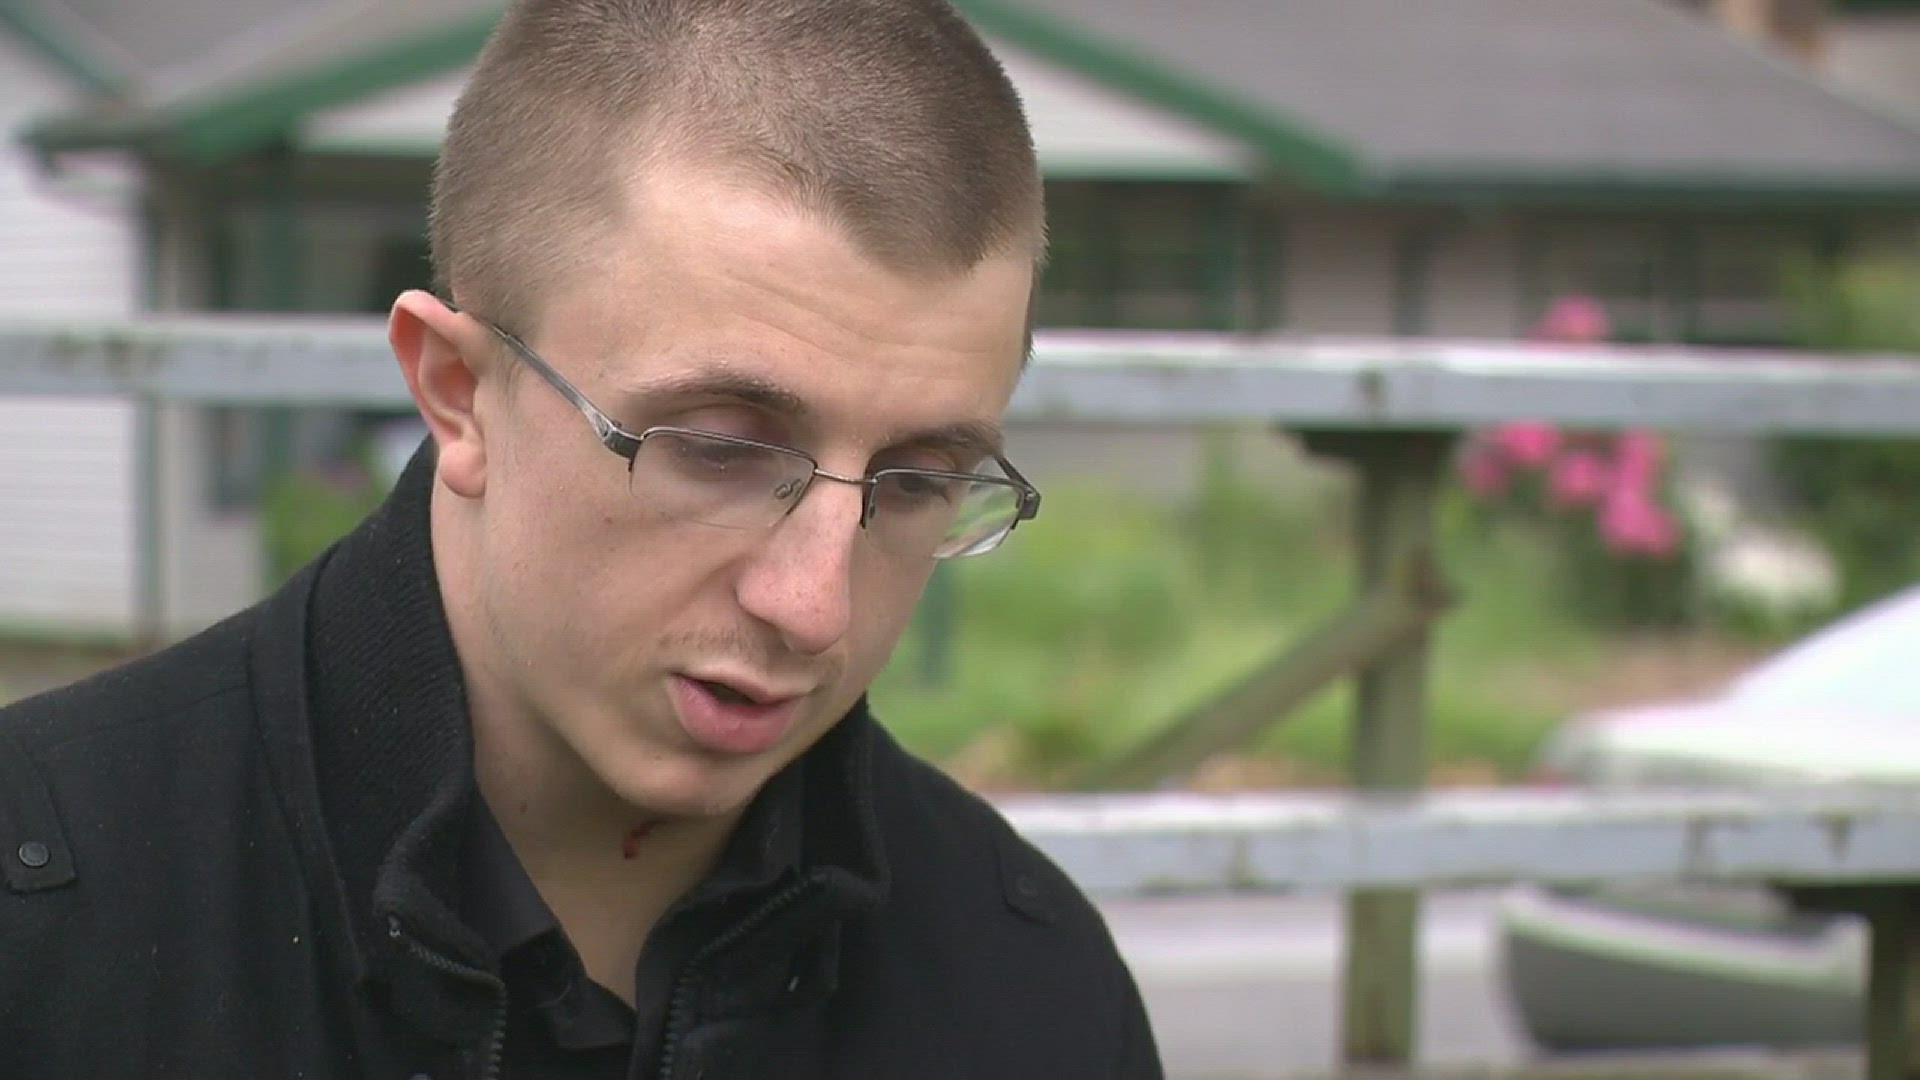 The surviving hero of last Friday's TriMet rampage spoke with KGW. Here's the full interview